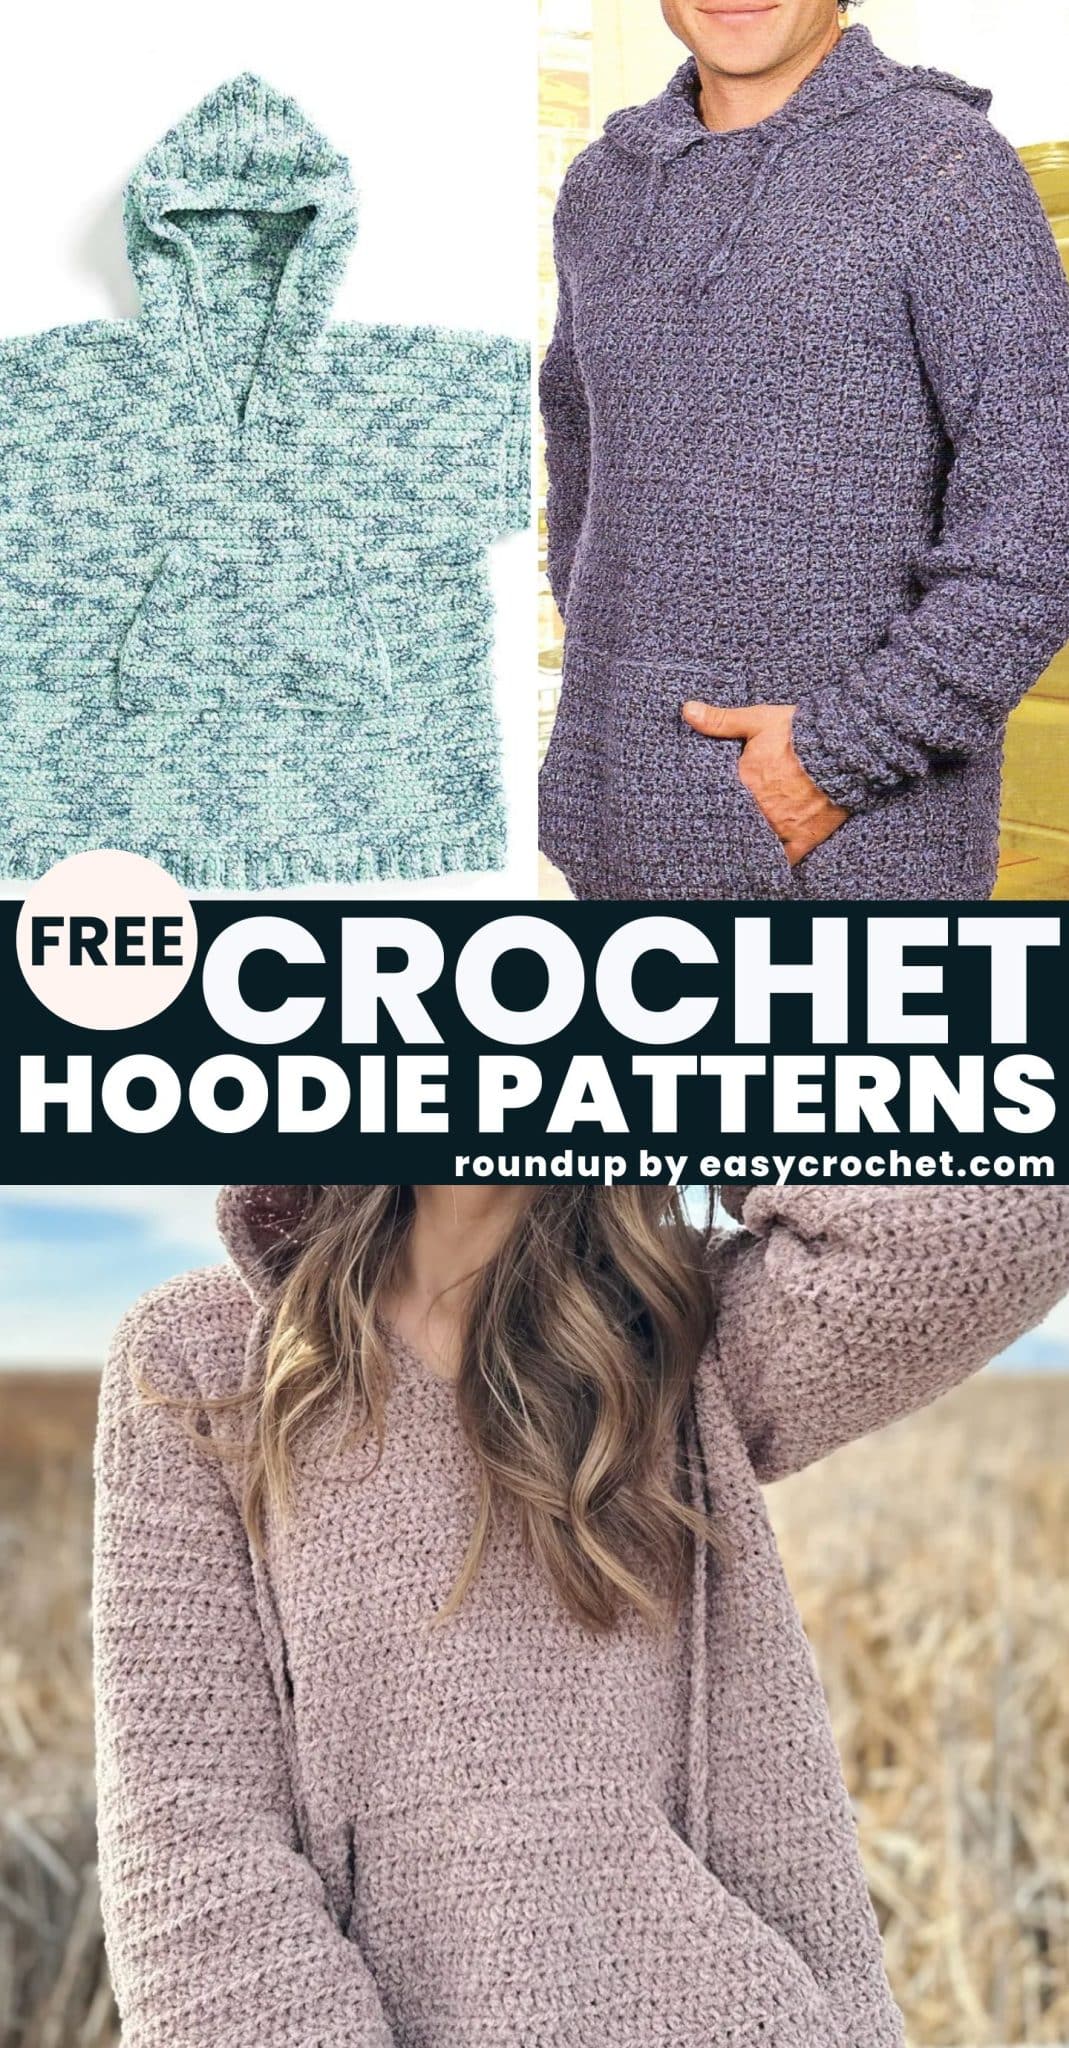 Crochet with Faux Fur Yarn using these Free Crochet Patterns